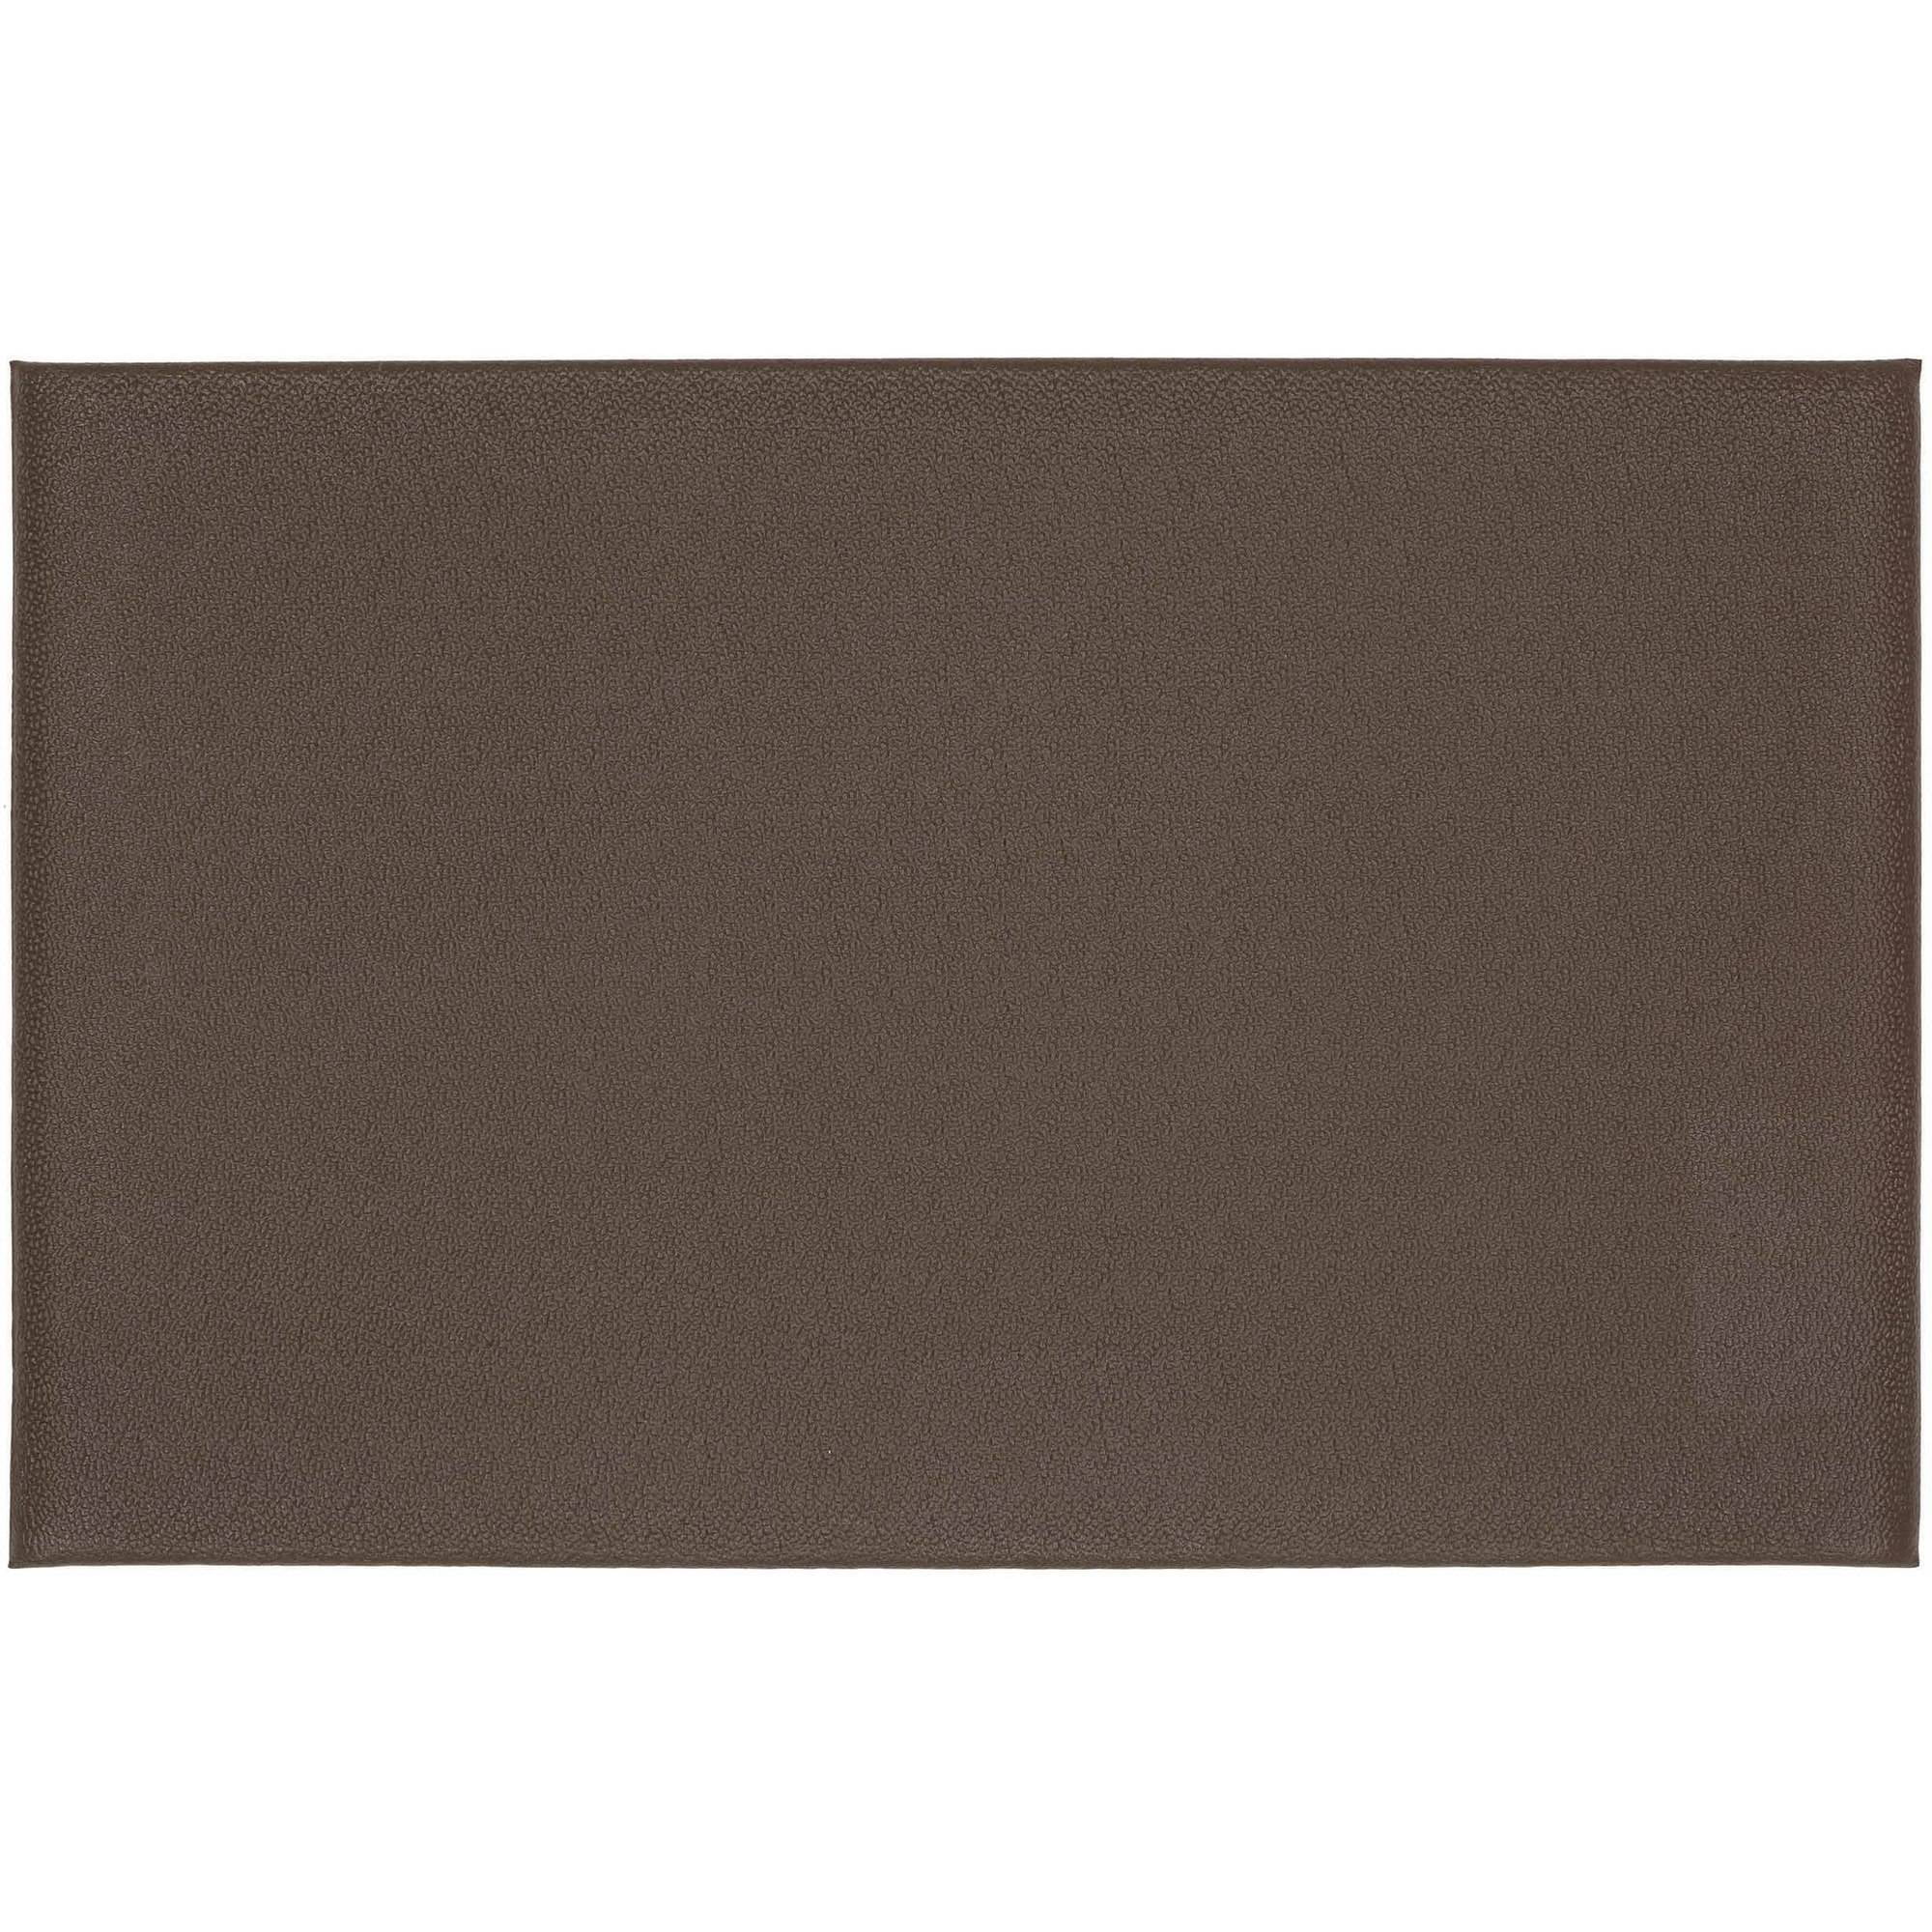 Mainstays Cushioned Solid Kitchen Mat, Rich Black, 20 x 45 - Runners, Facebook Marketplace